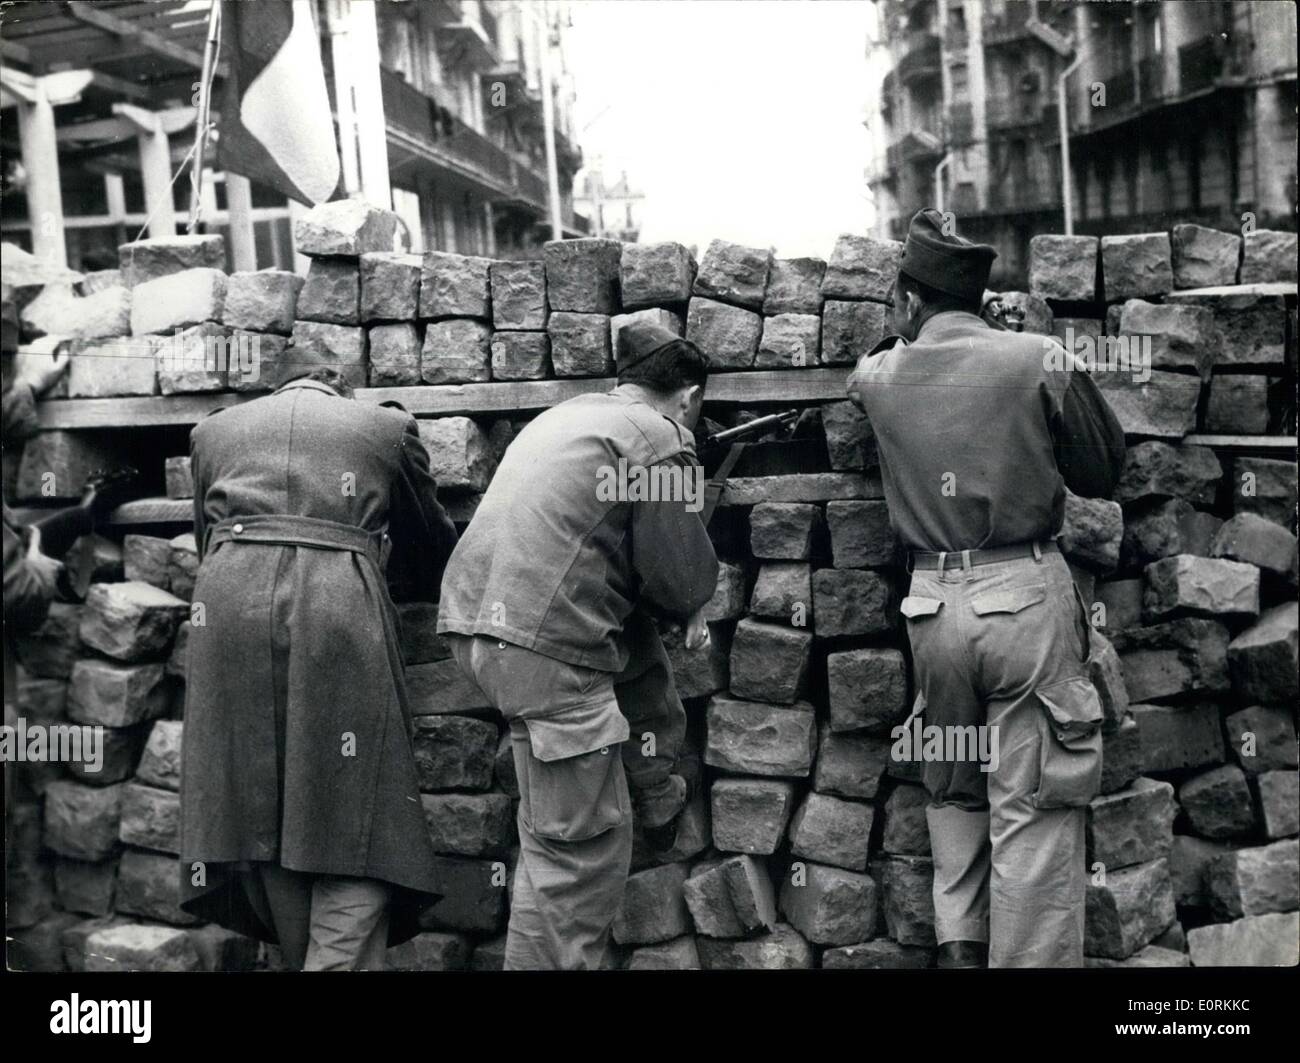 Jan. 01, 1960 - Revolt in Algiers: Photo shows ex-servicemen armed woth sub machine guns manning a barricade in the Rue Michelet, the insurgents strong hold. Stock Photo